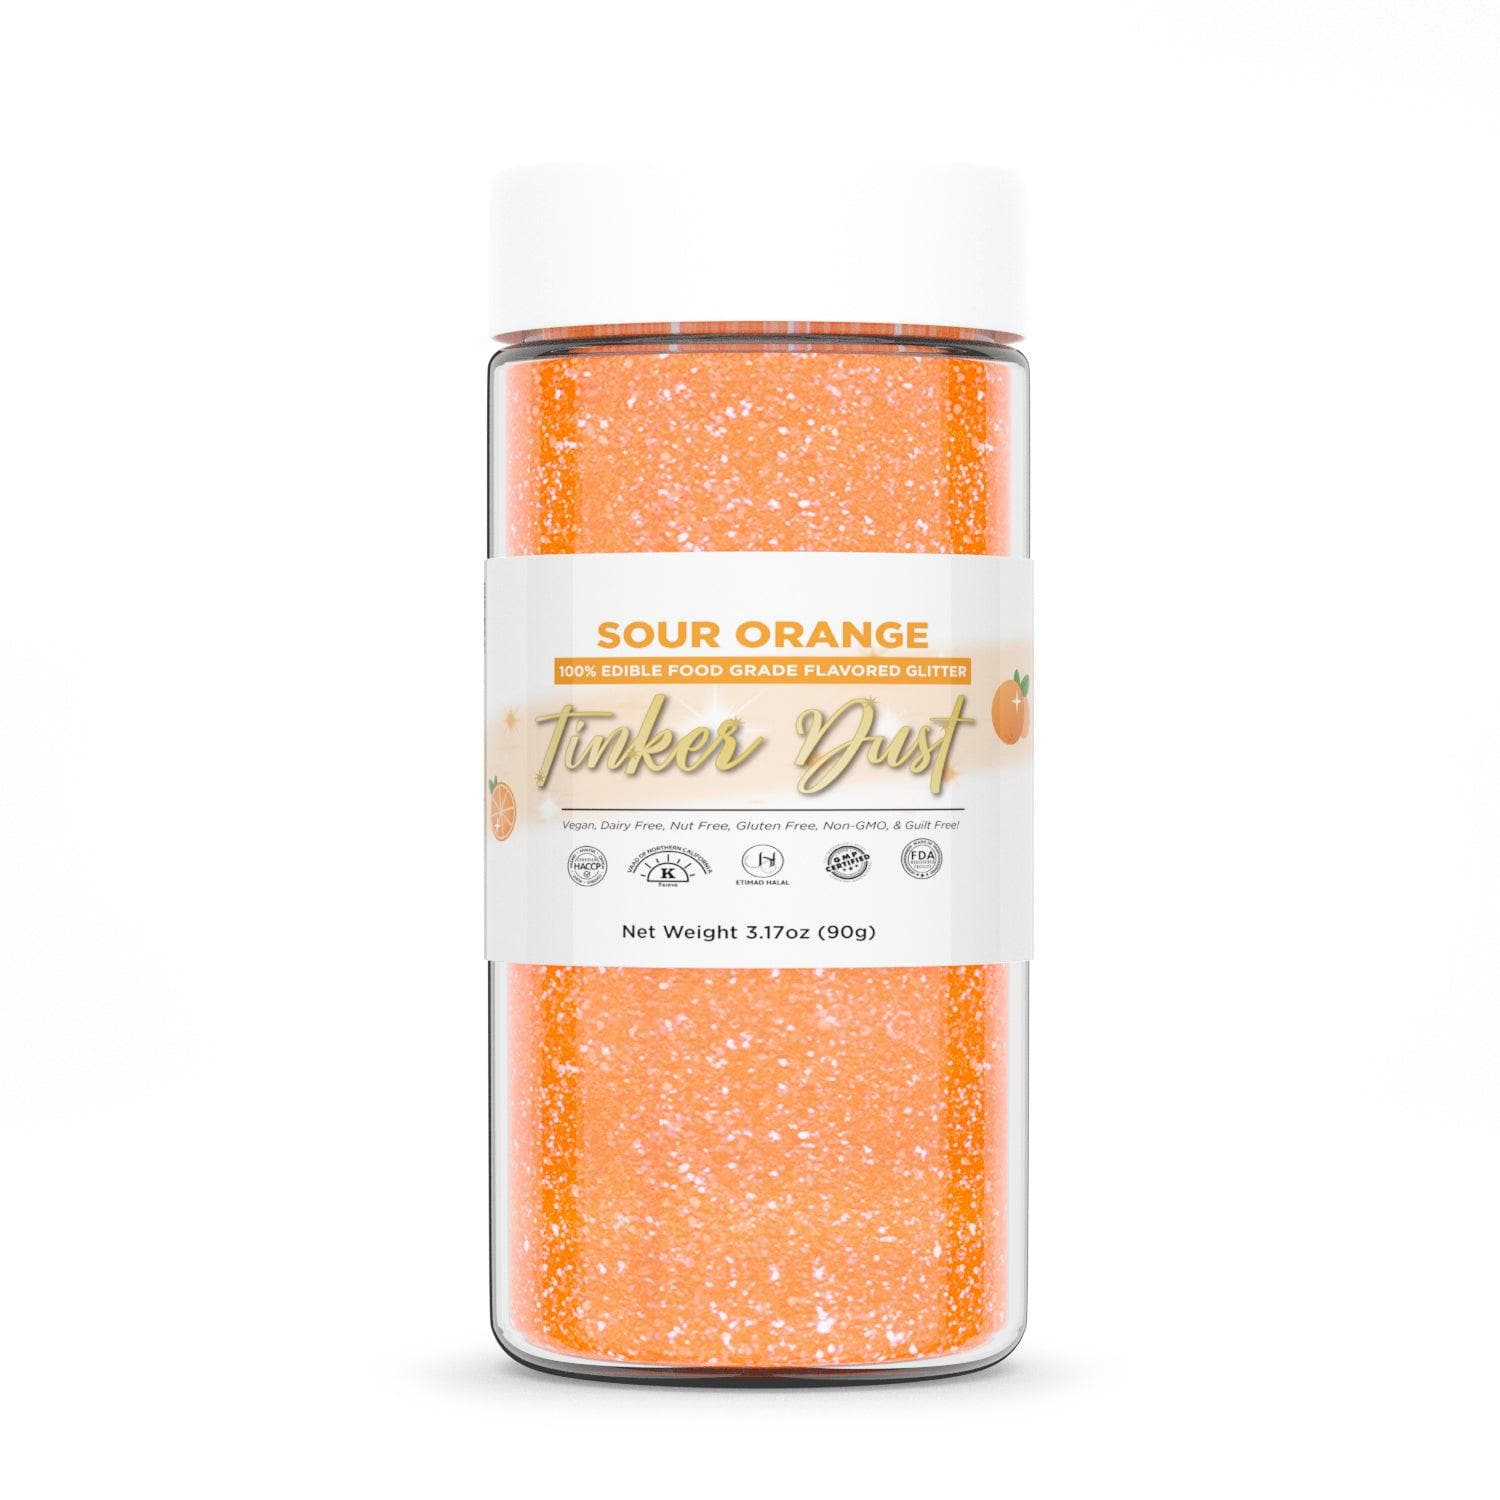 Buy Sour Orange Flavored Tinker Dust - Powder Candy - Bakell